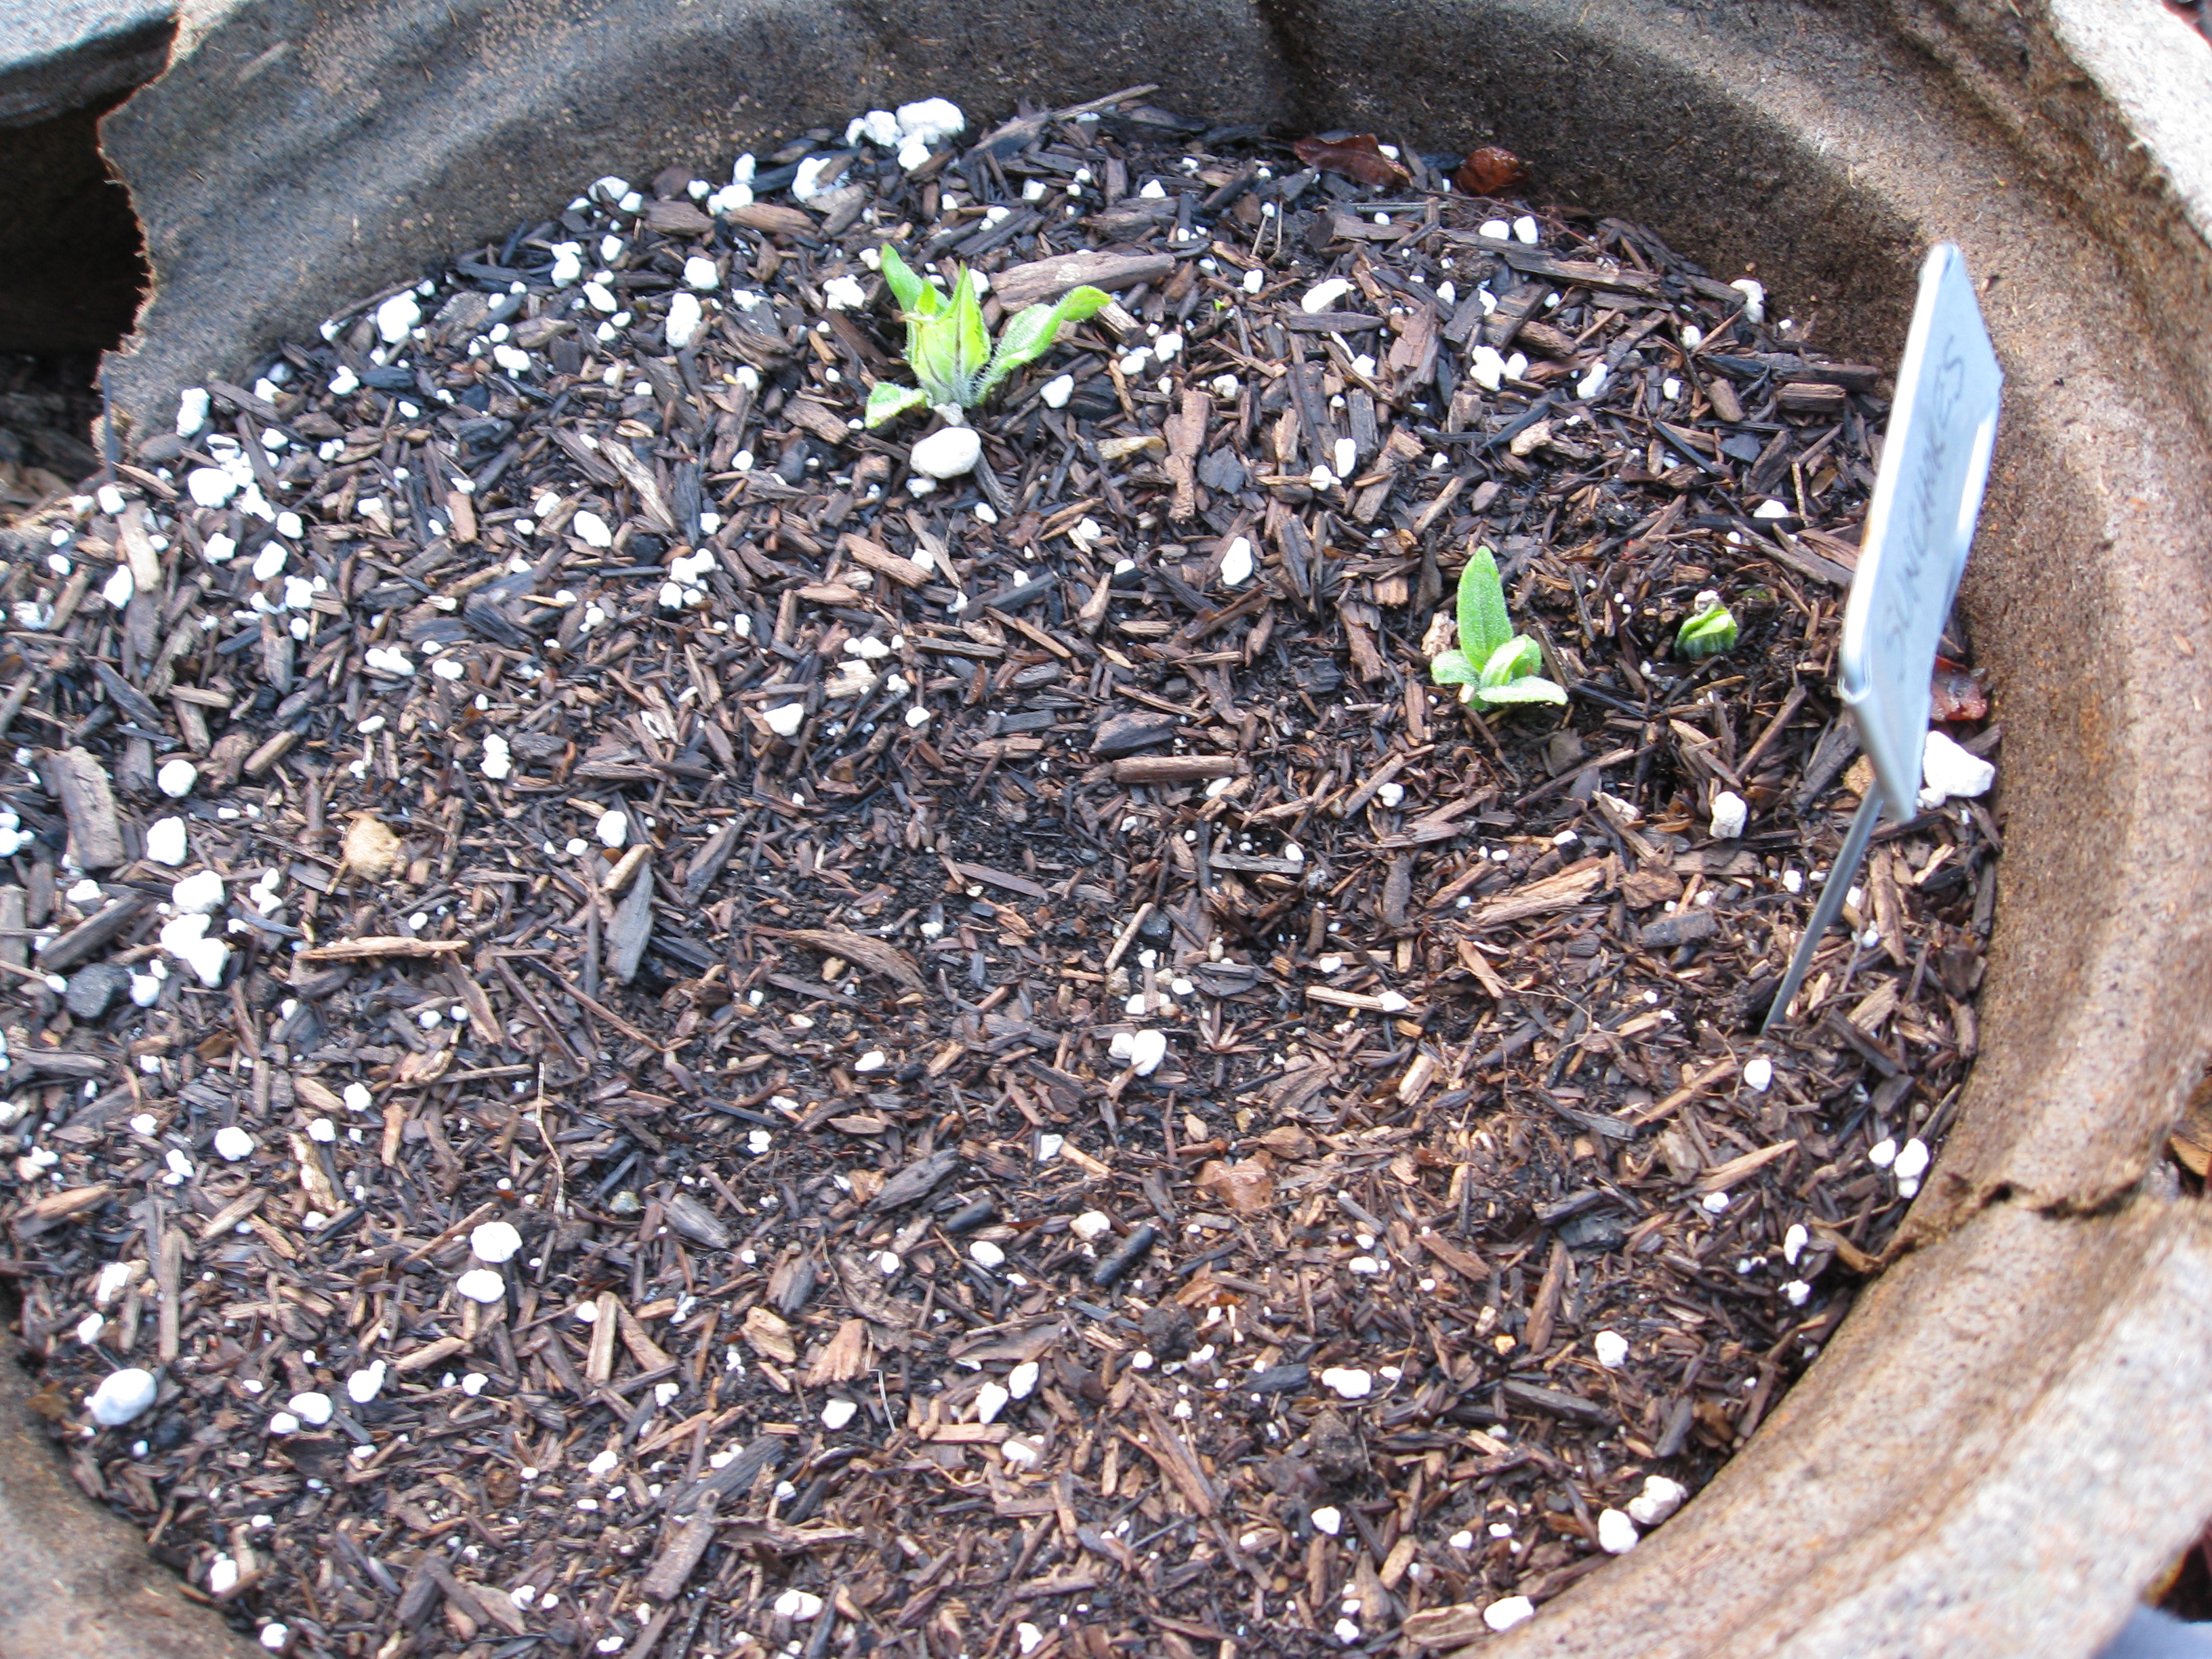 Sprouts took their time to pop above the soil.